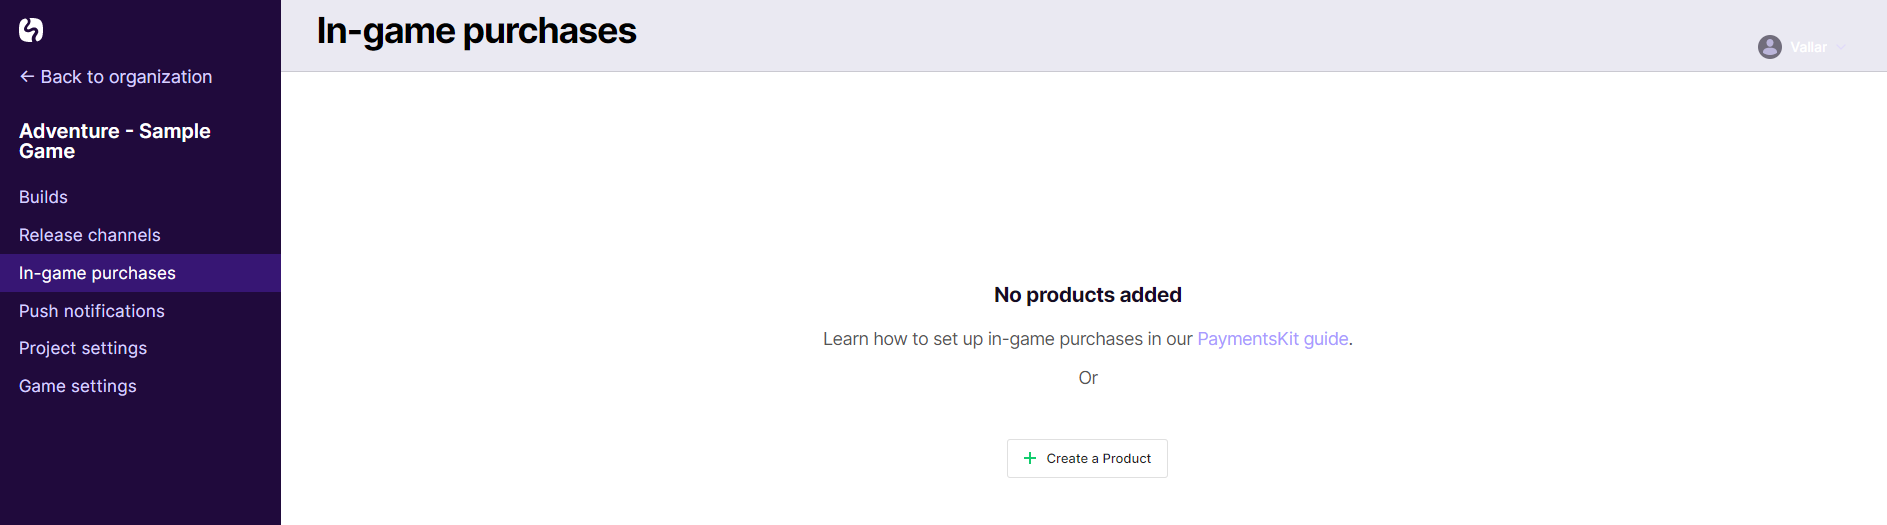 In-game purchases tab.